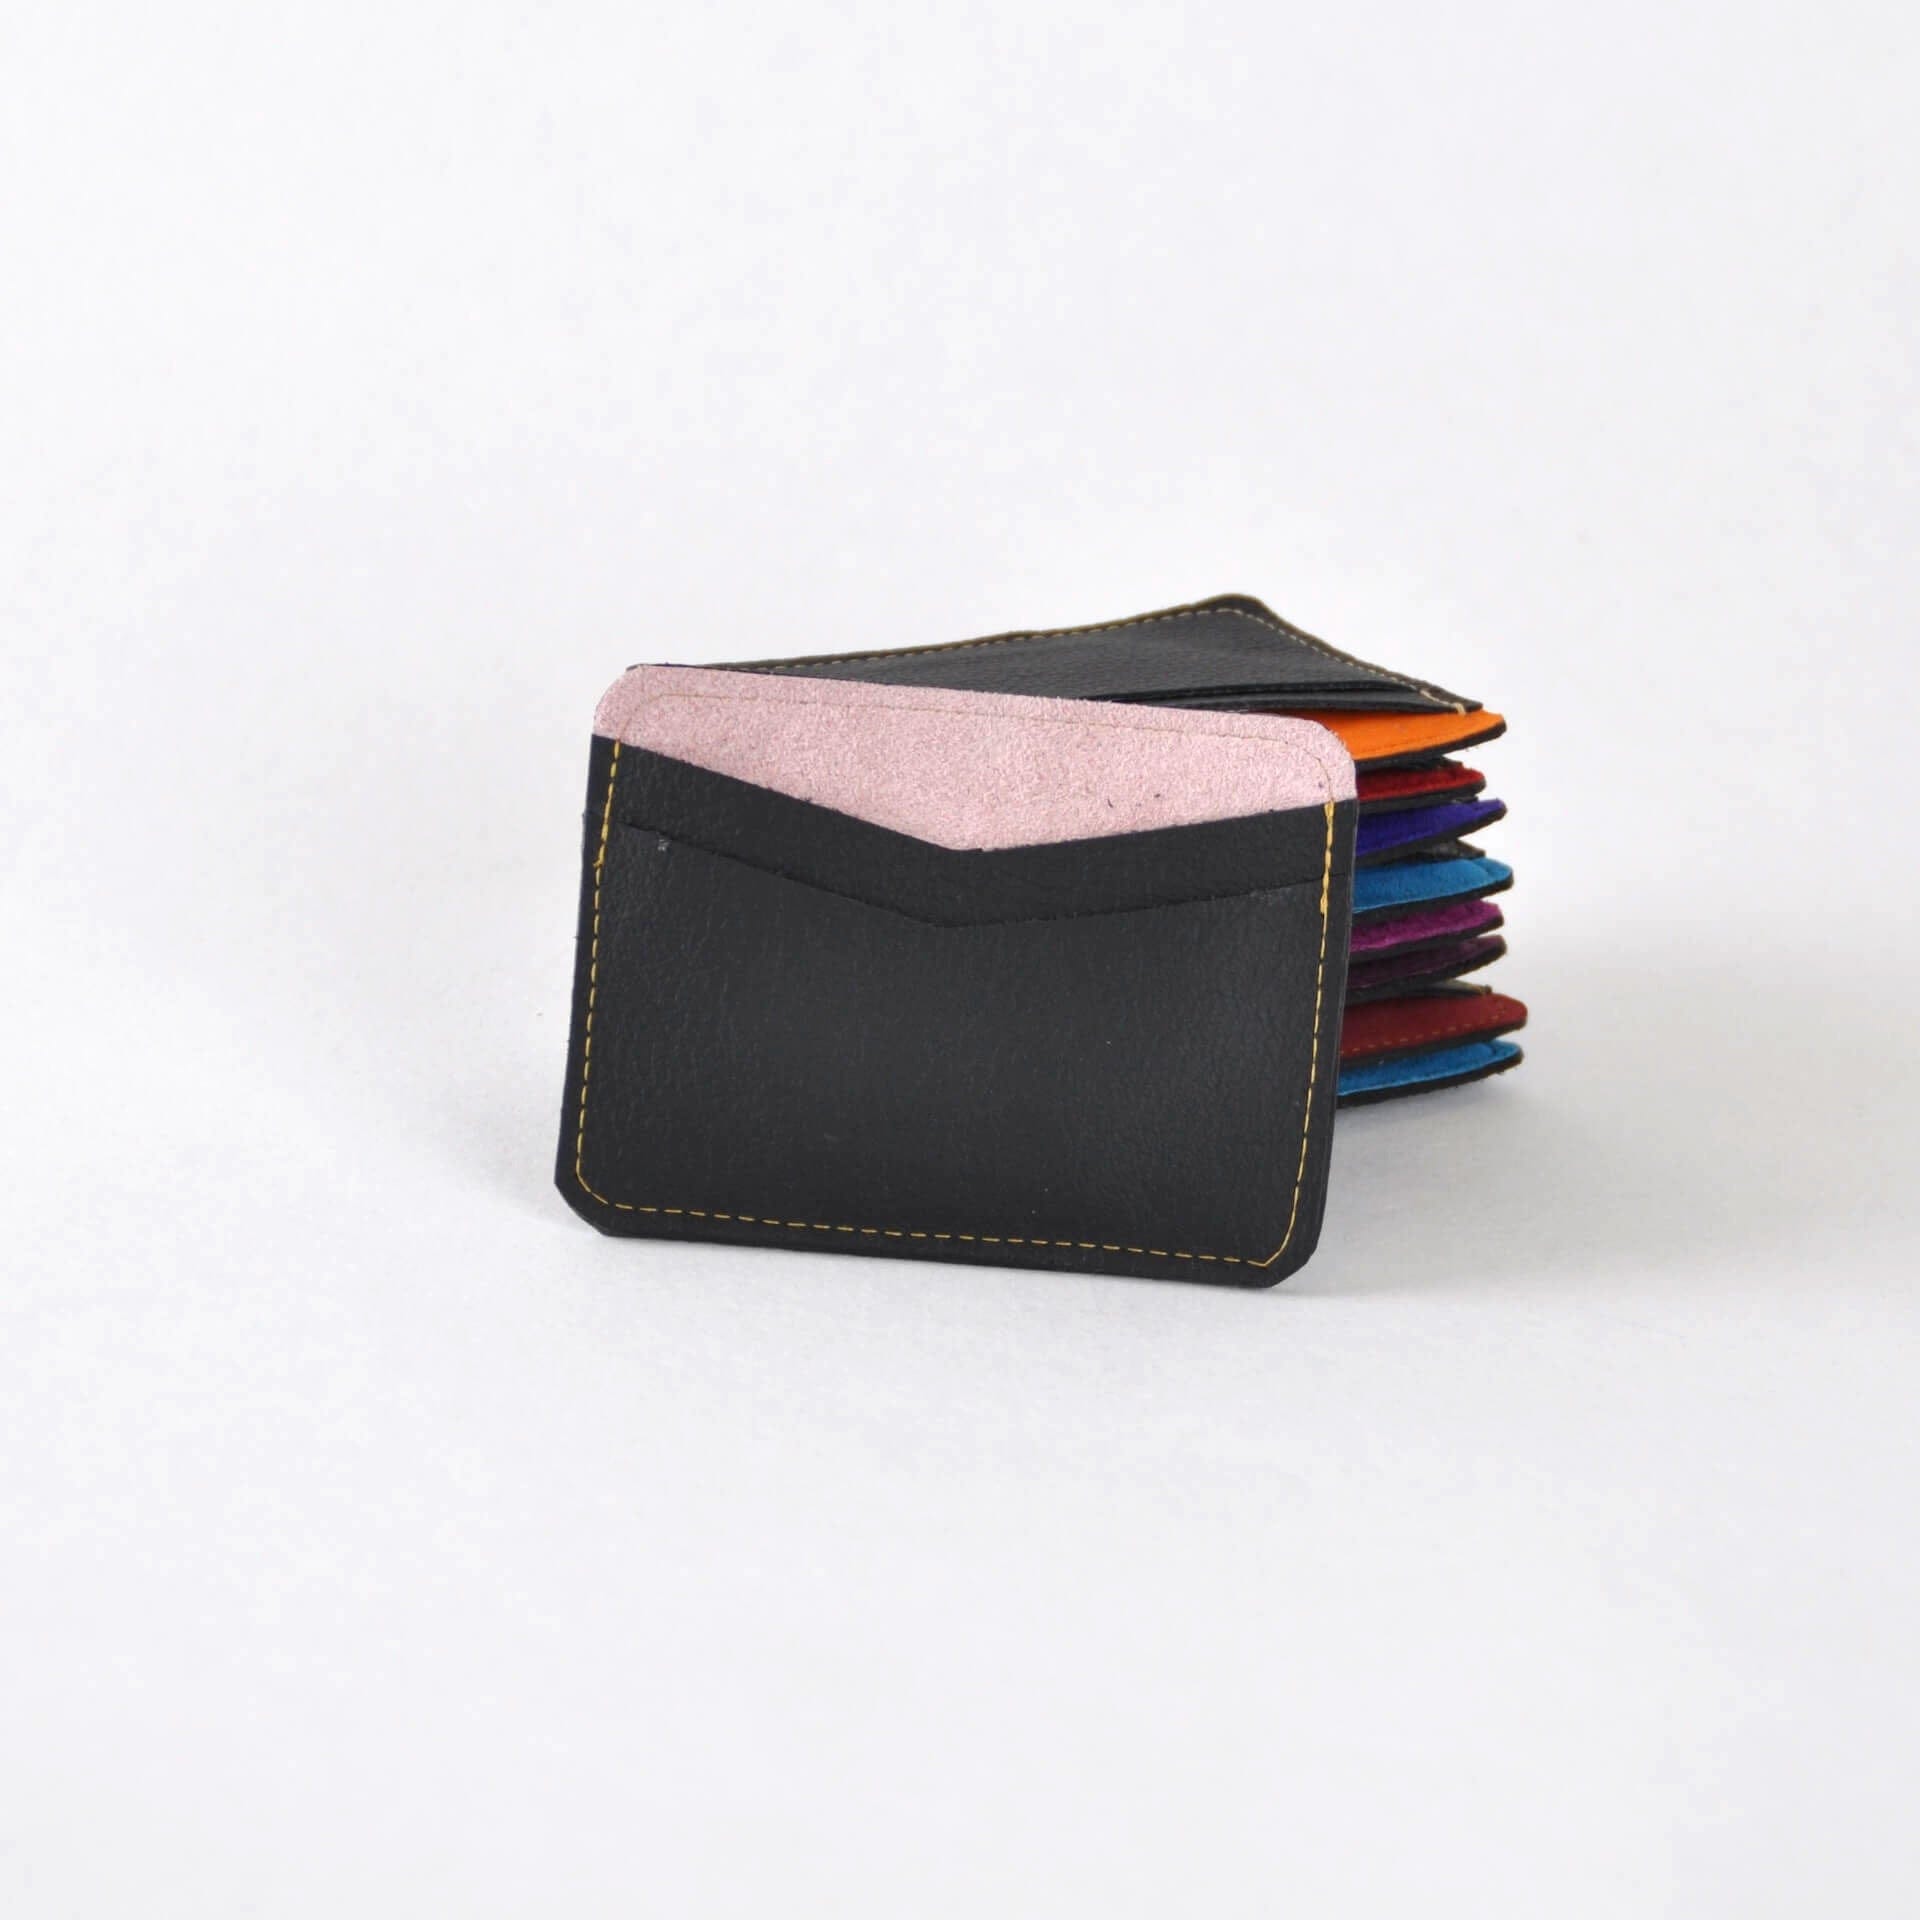 Zoe Dunn Designs Purse / Wallet Card Holder - Recycled Leather